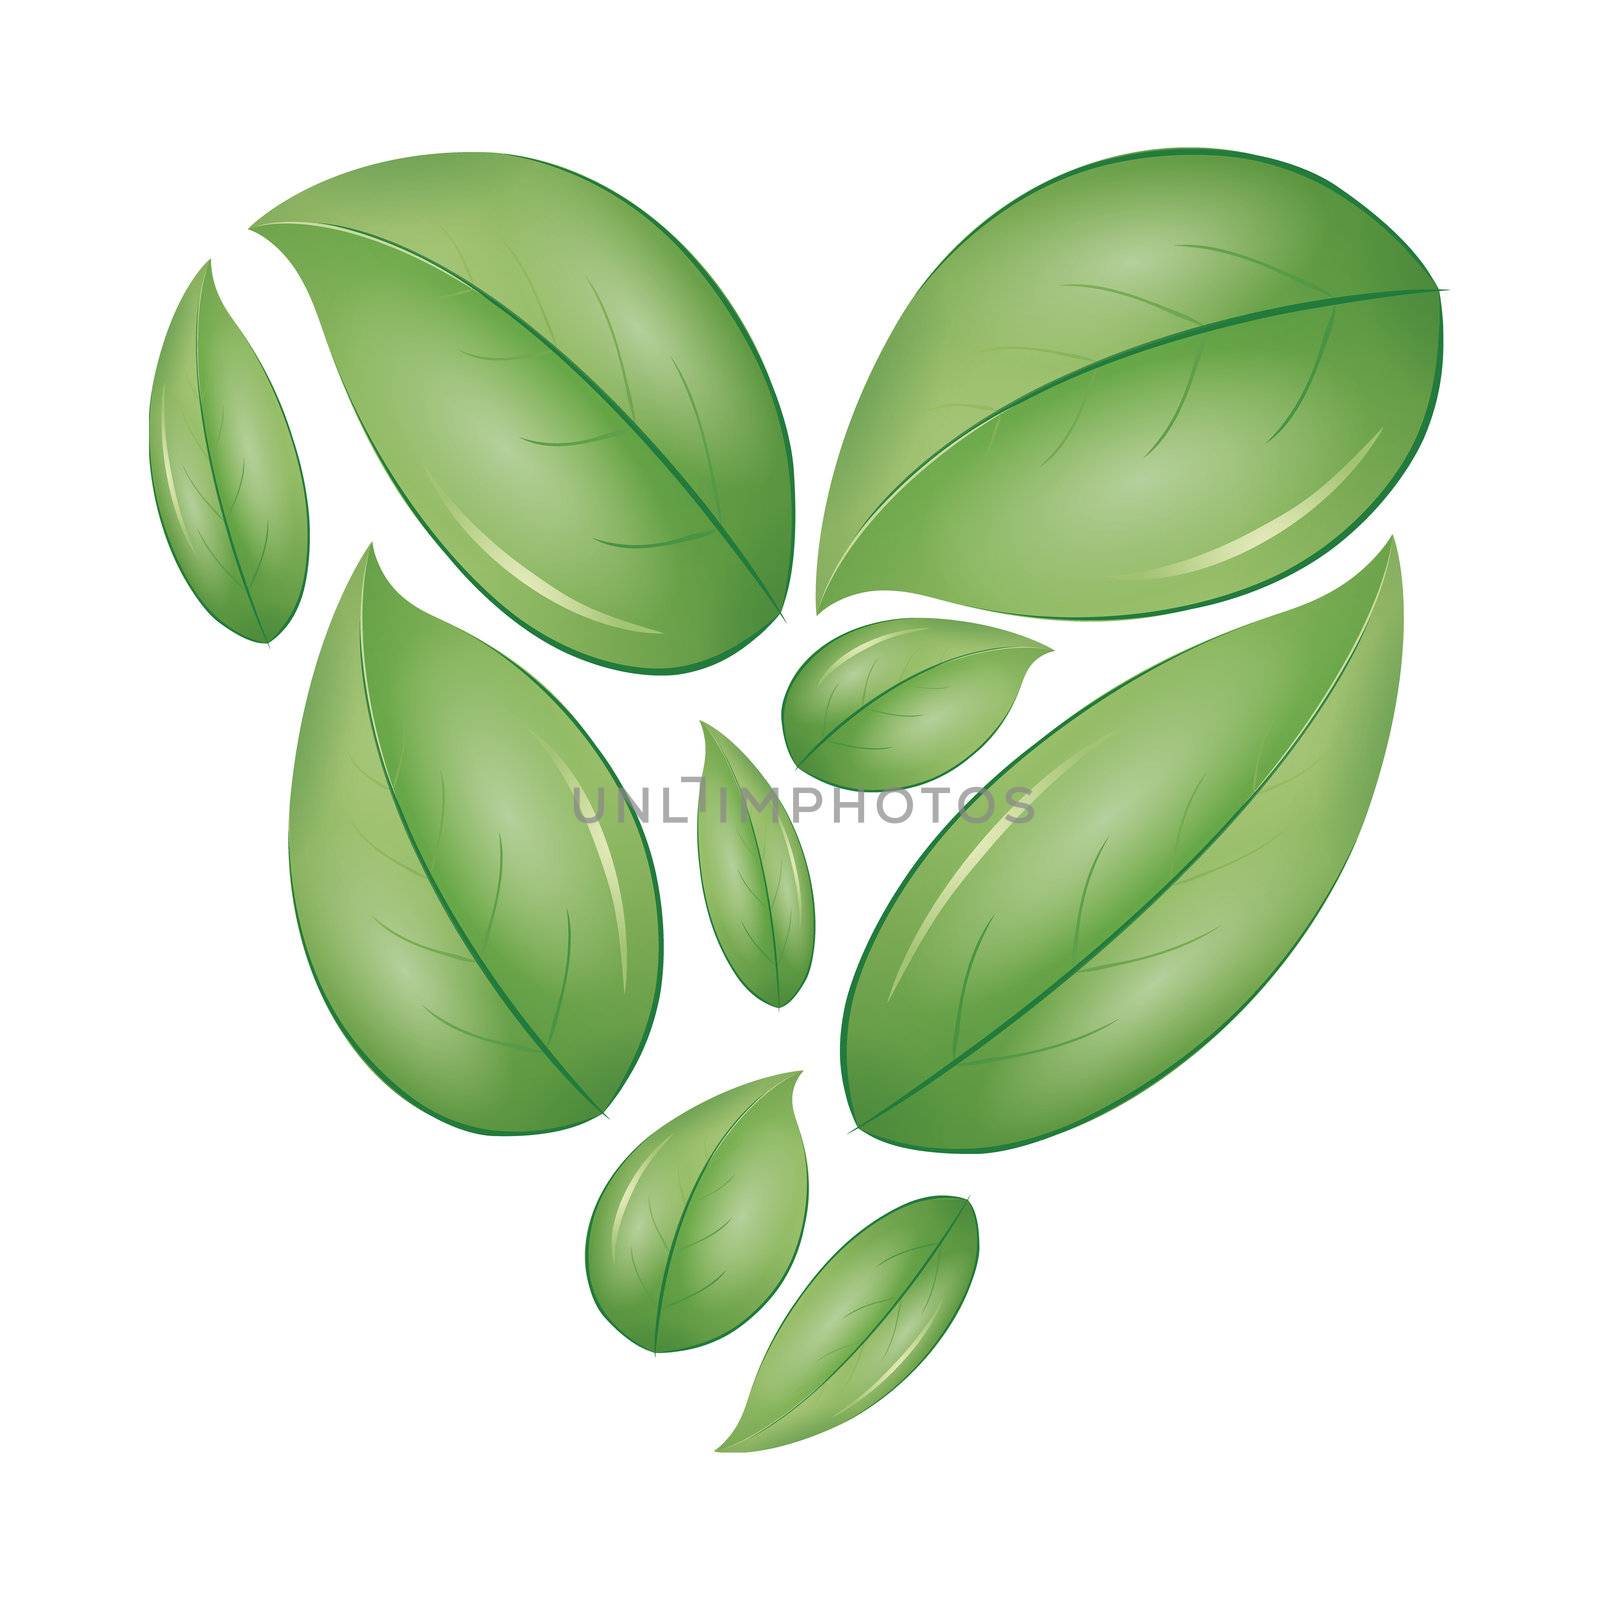 An image of a green heart of leafs